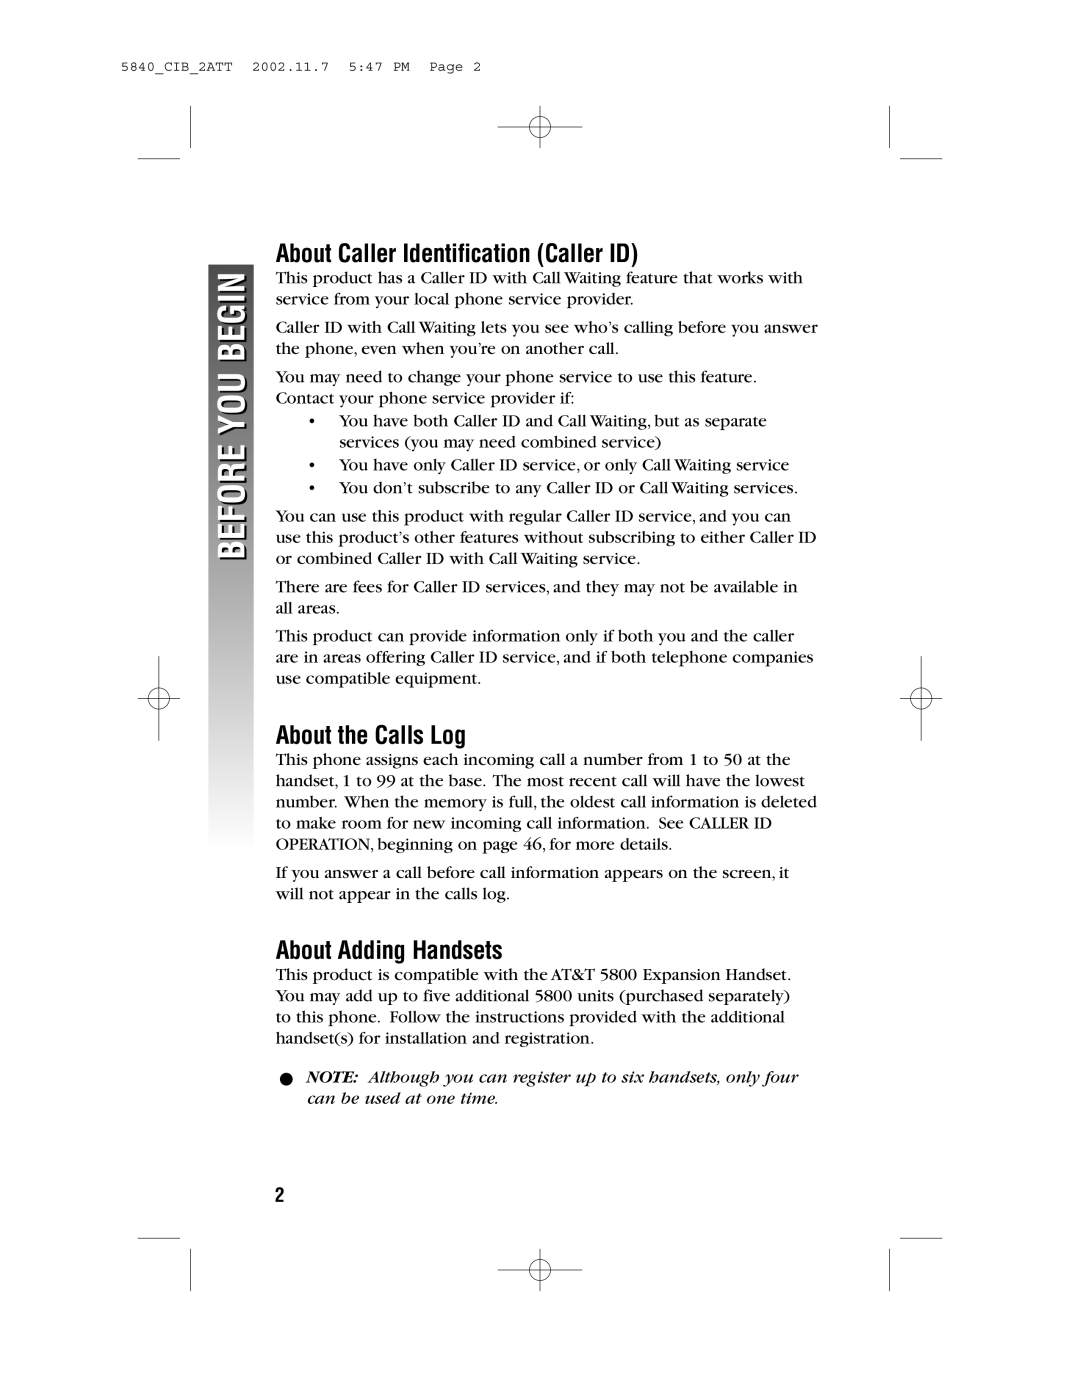 AT&T 5840 user manual About Caller Identification Caller ID, About the Calls Log, About Adding Handsets, Before You Begin 